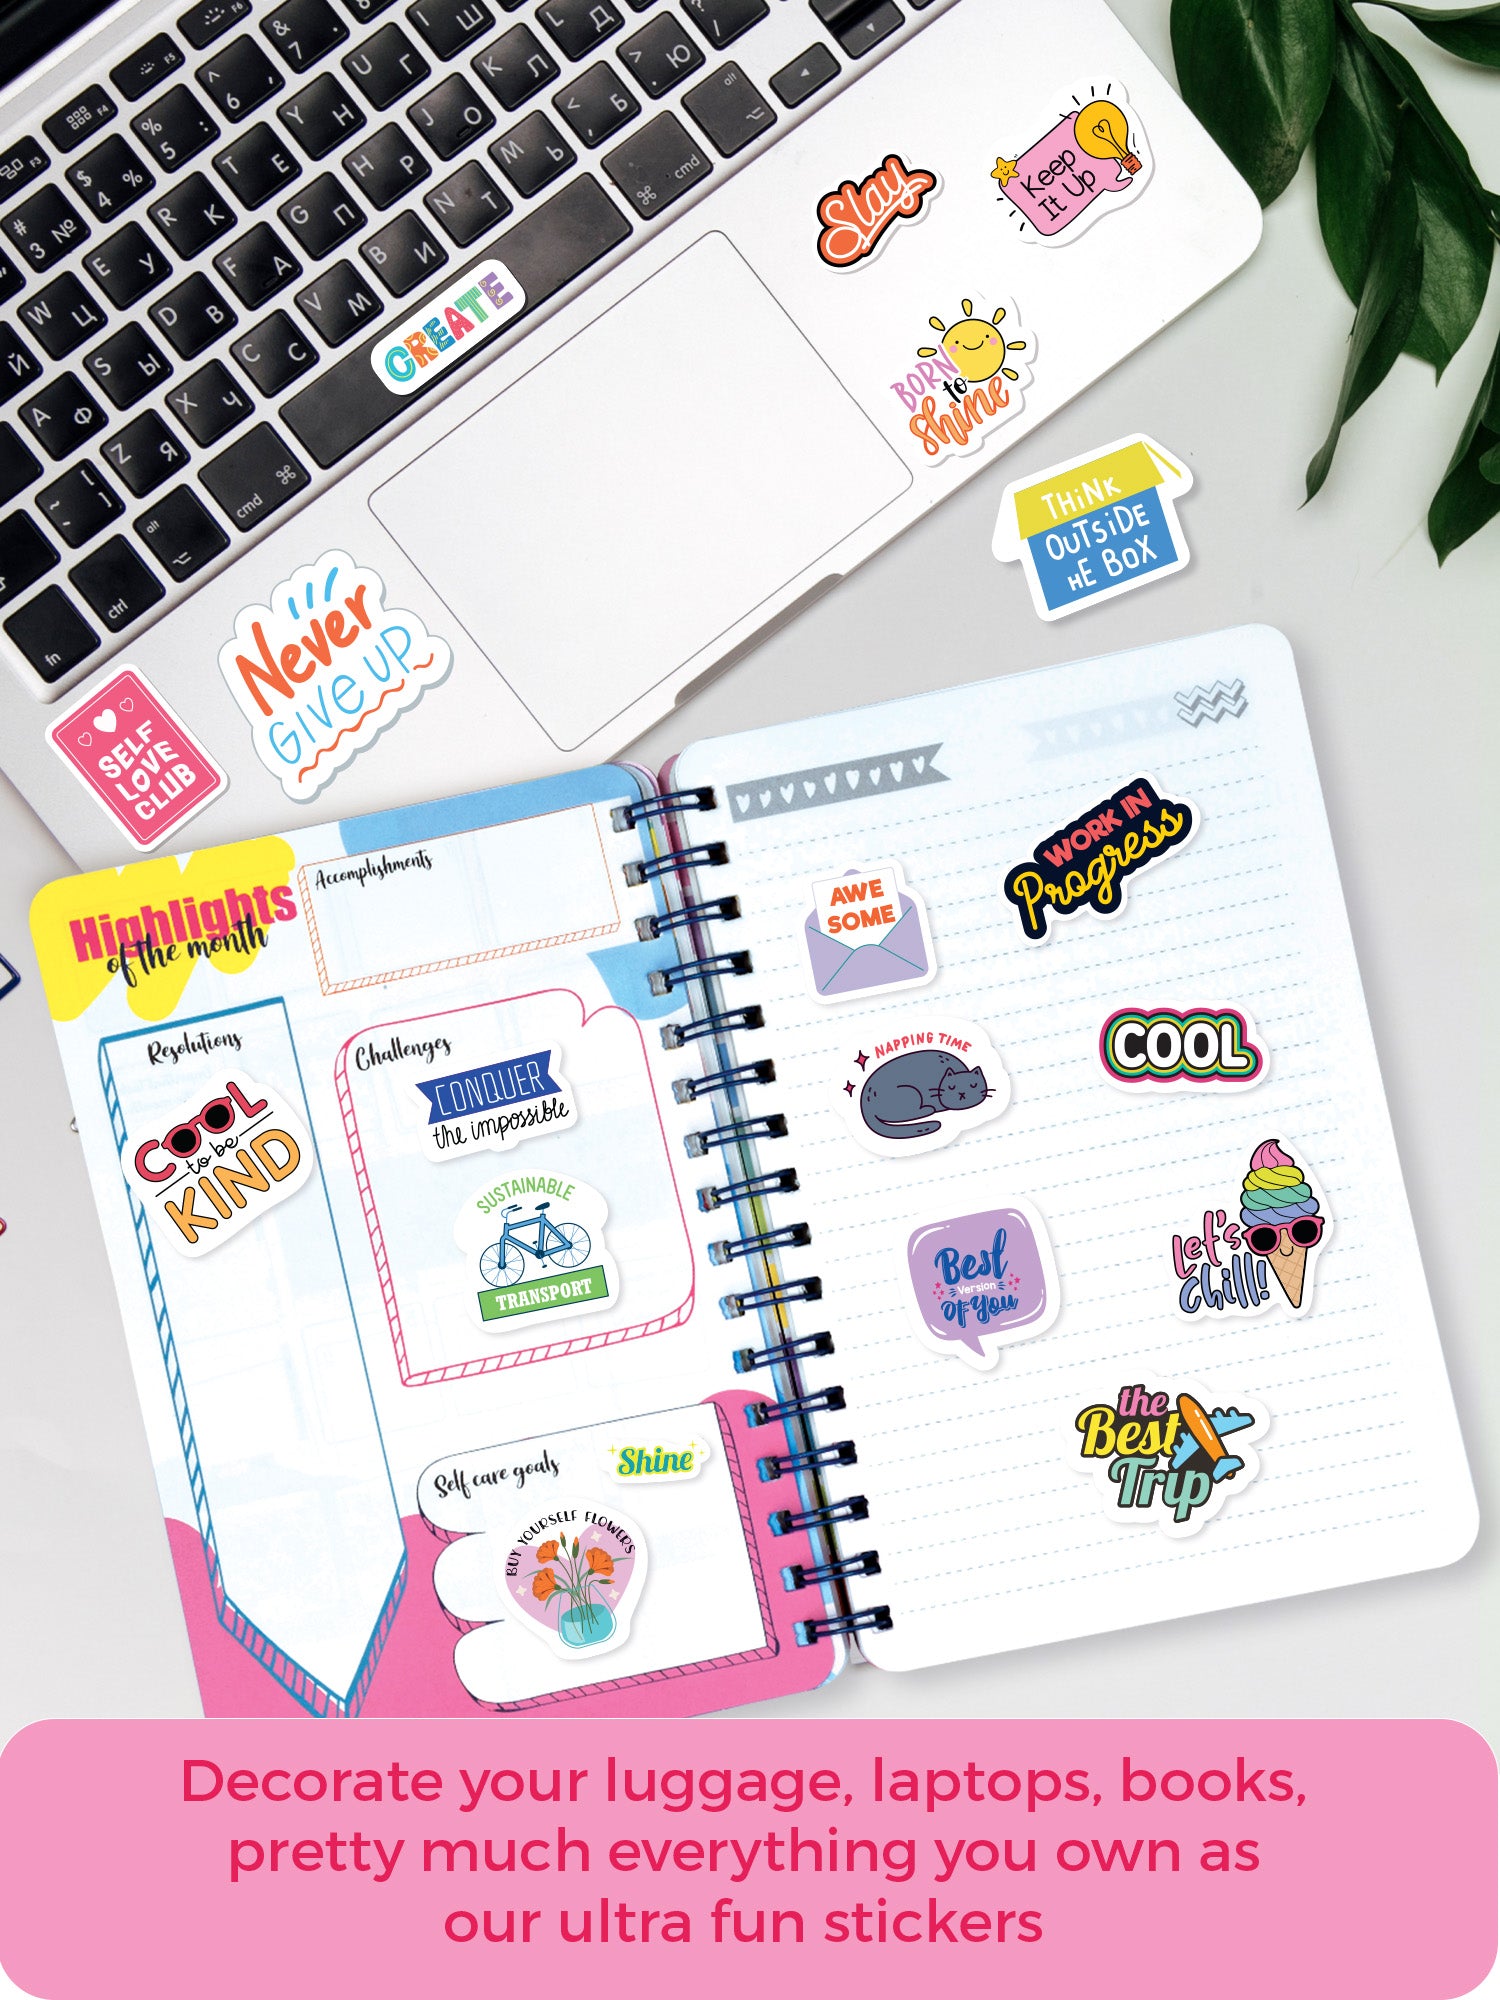 Get Creative with 350+ Fun & Quirky Stickers (Plan Ahead)